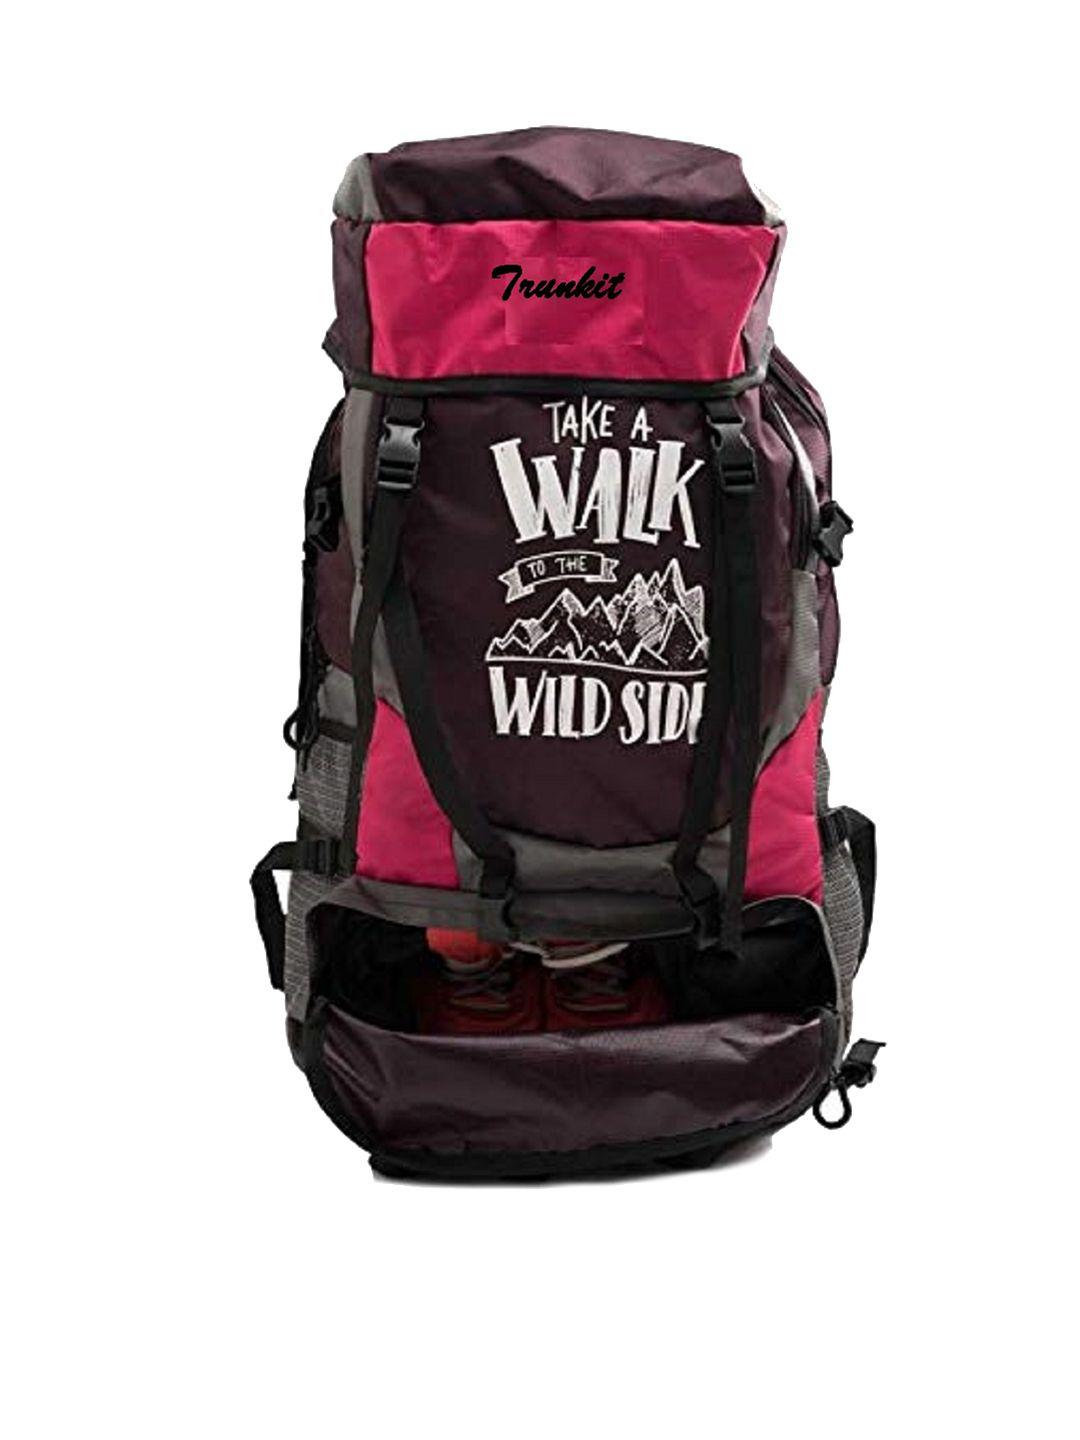 trunkit pink & black printed travel bag with shoe compartment rucksack